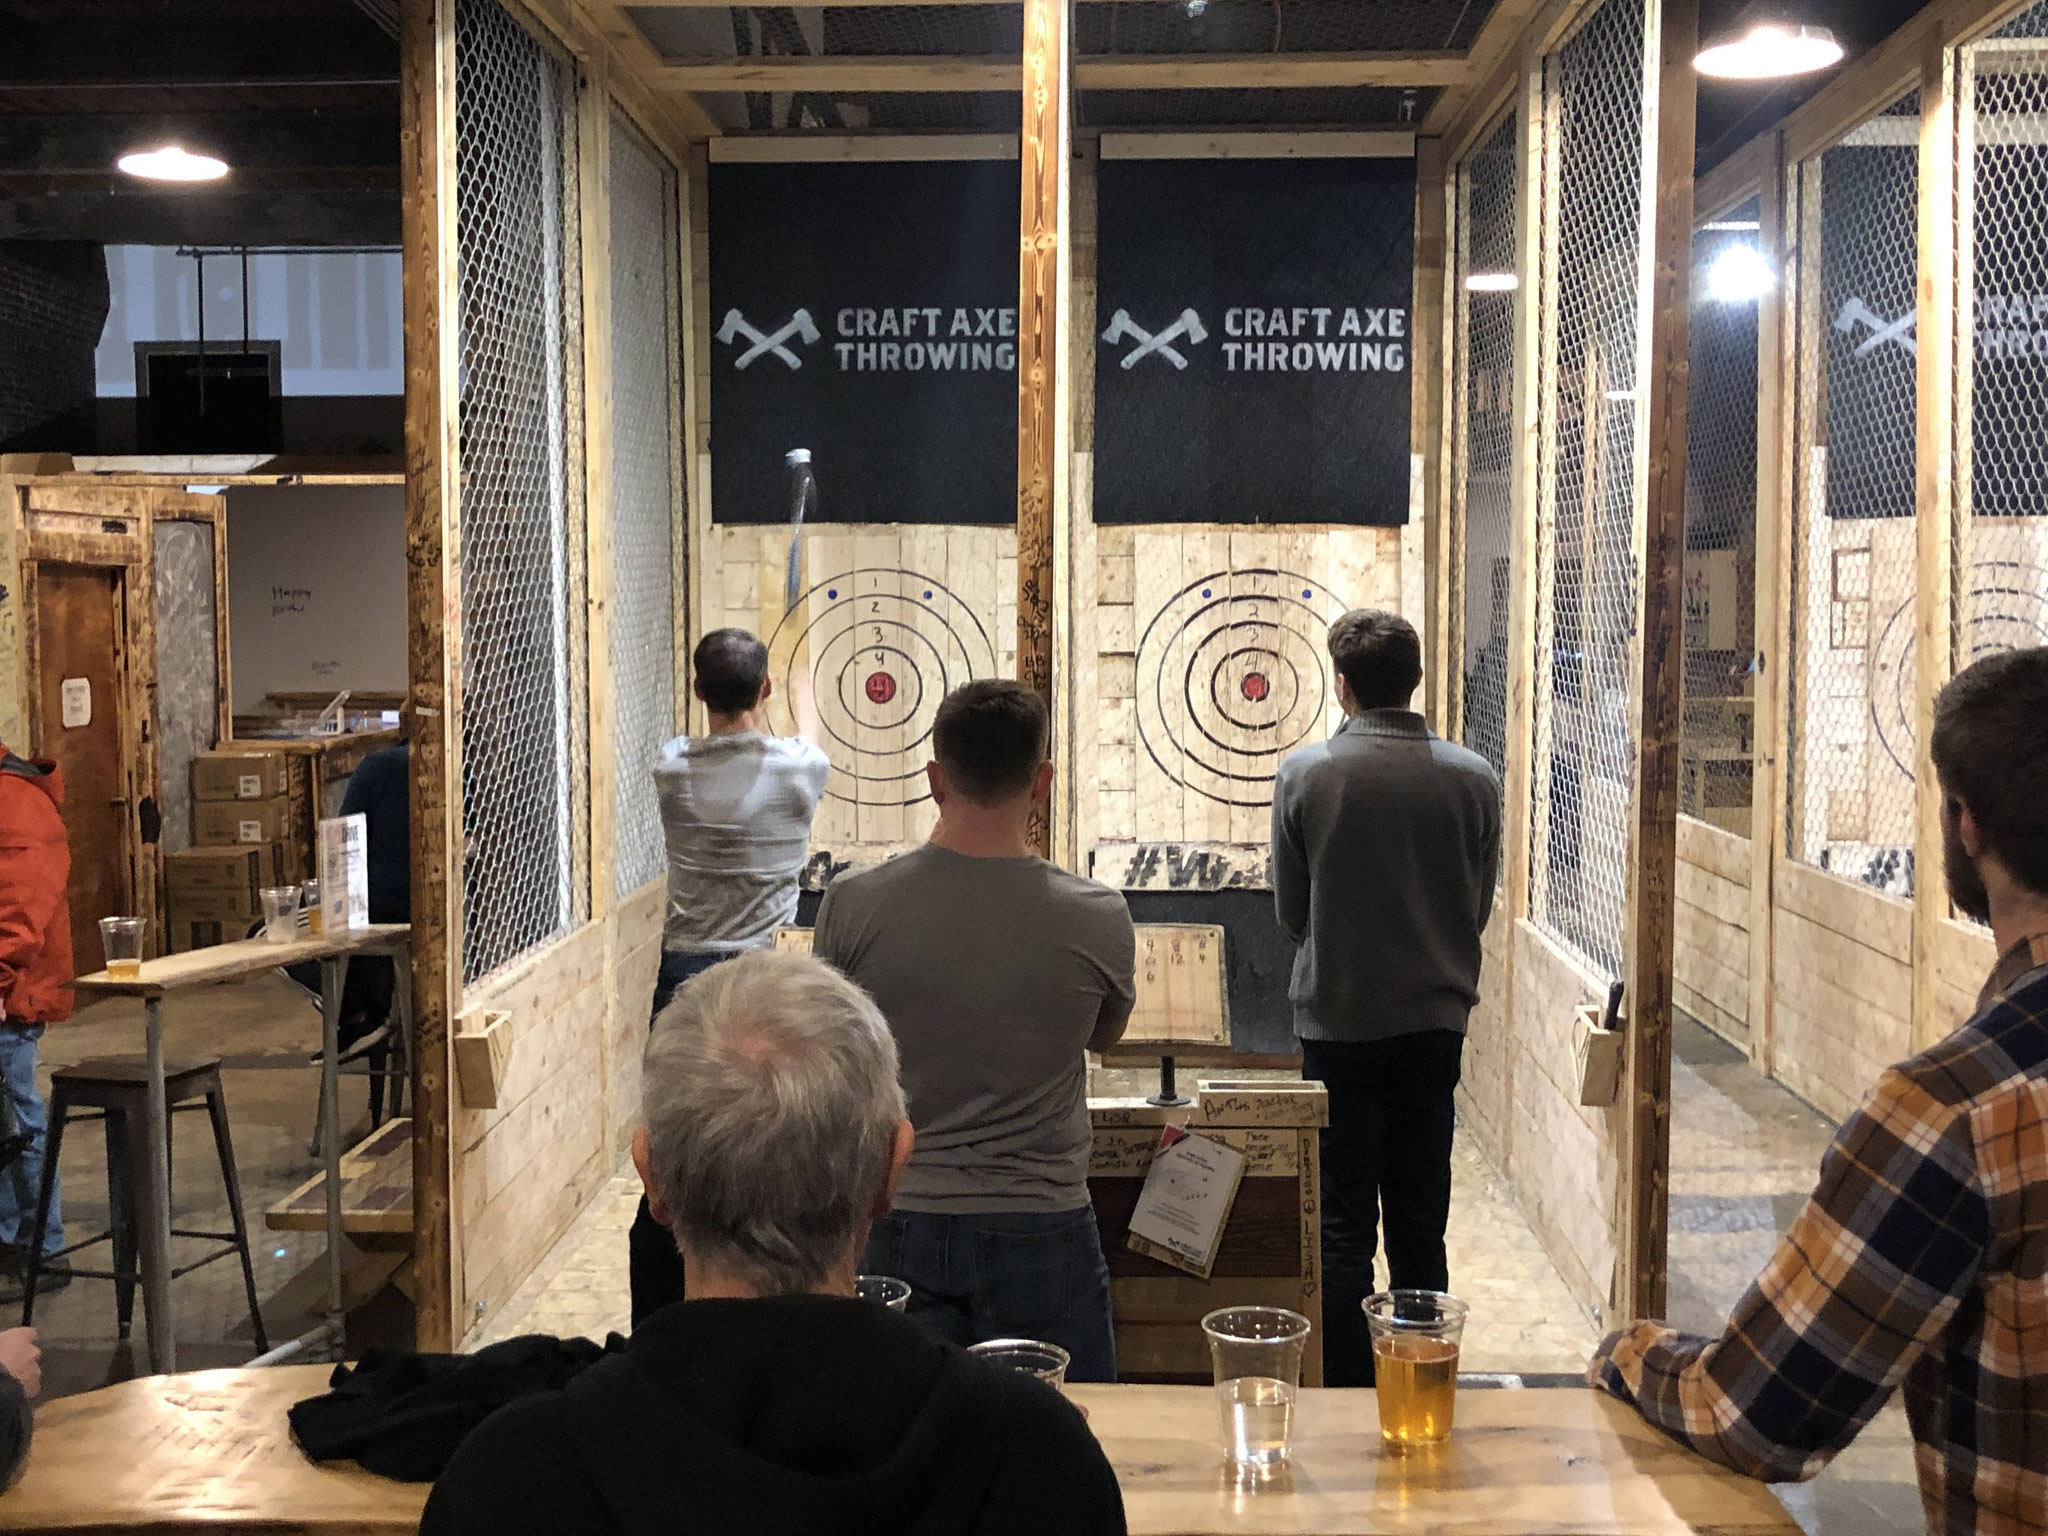 Jerry went axe throwing!